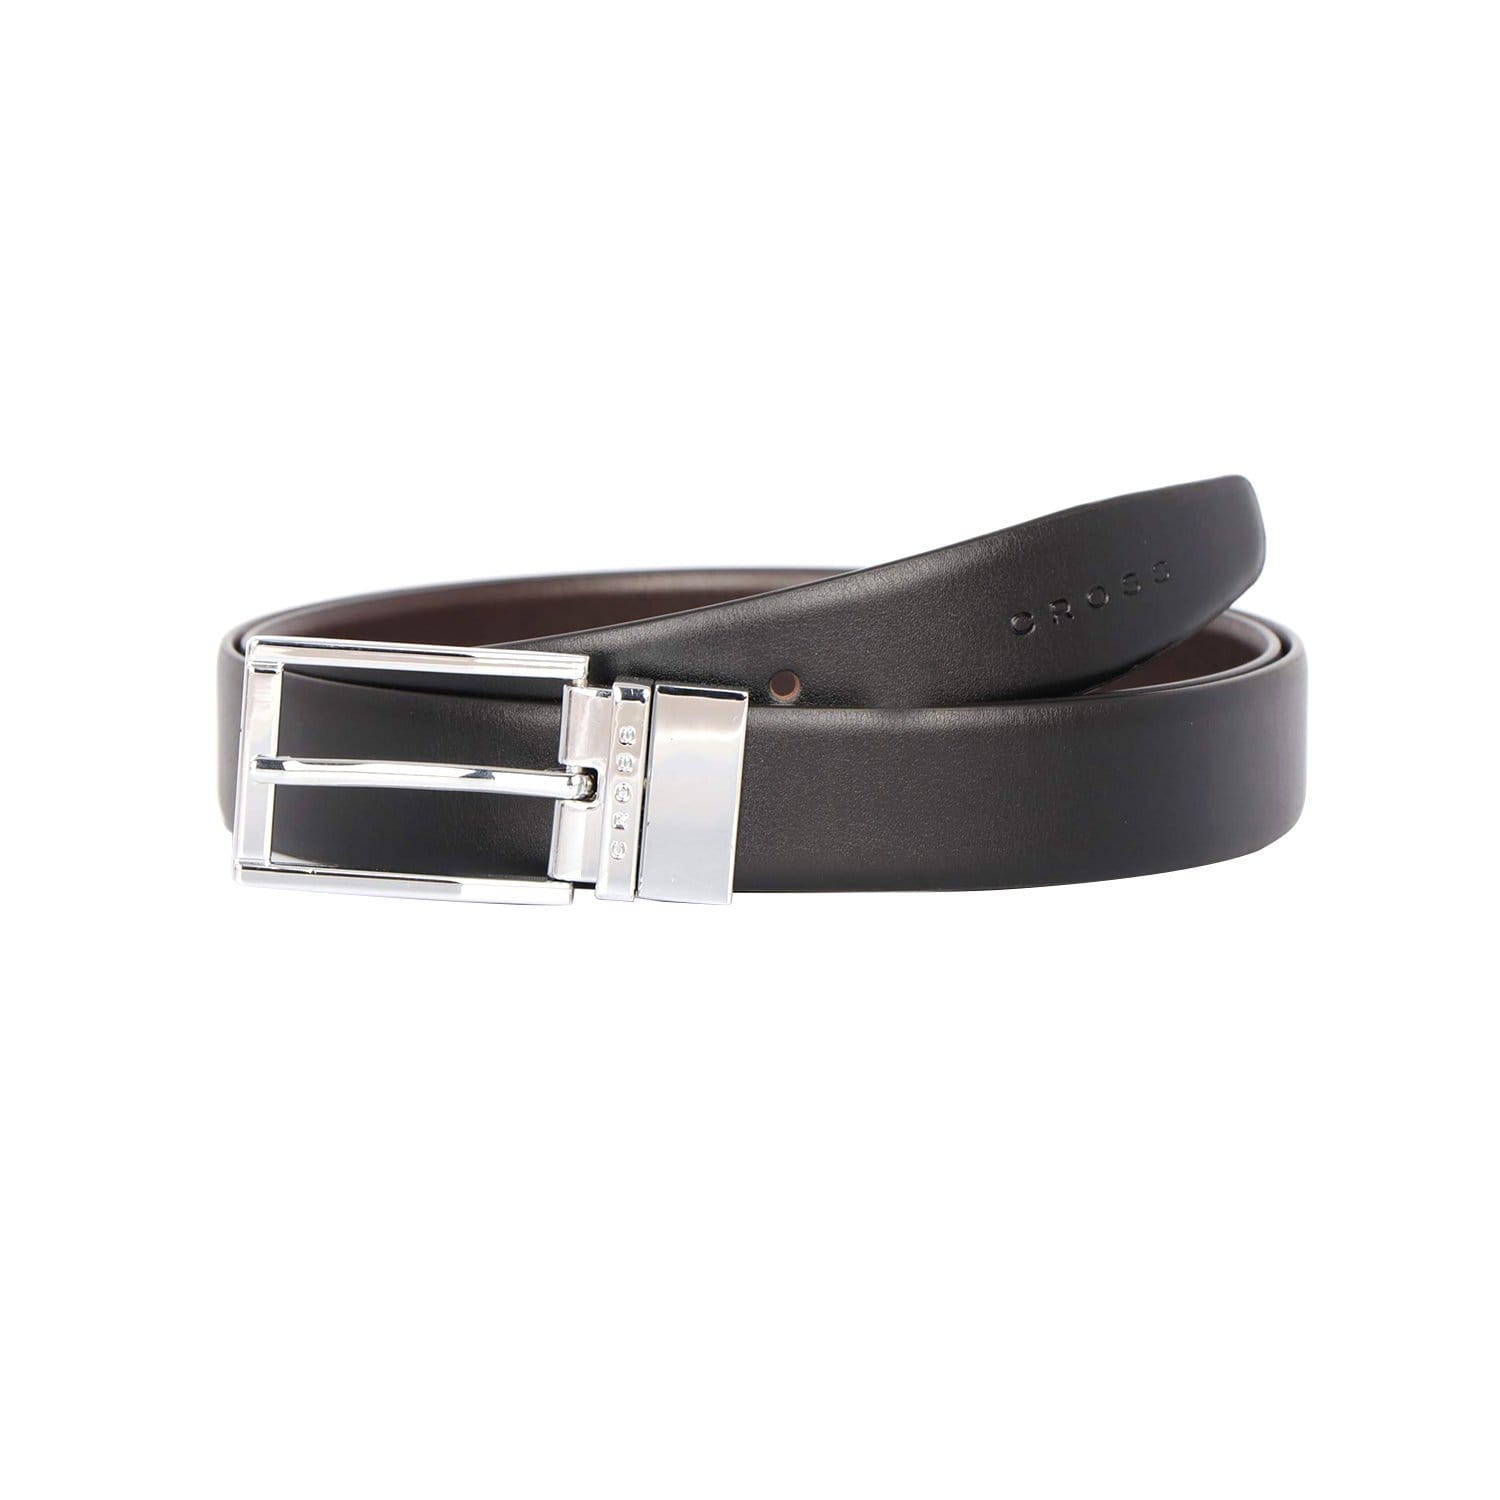 Cross Santiago Cut-to-Fit Style Reversible Leather Belt with 30mm Pronged Buckle for Men - Black and Brown XXL - AC318491N-XXL - Jashanmal Home